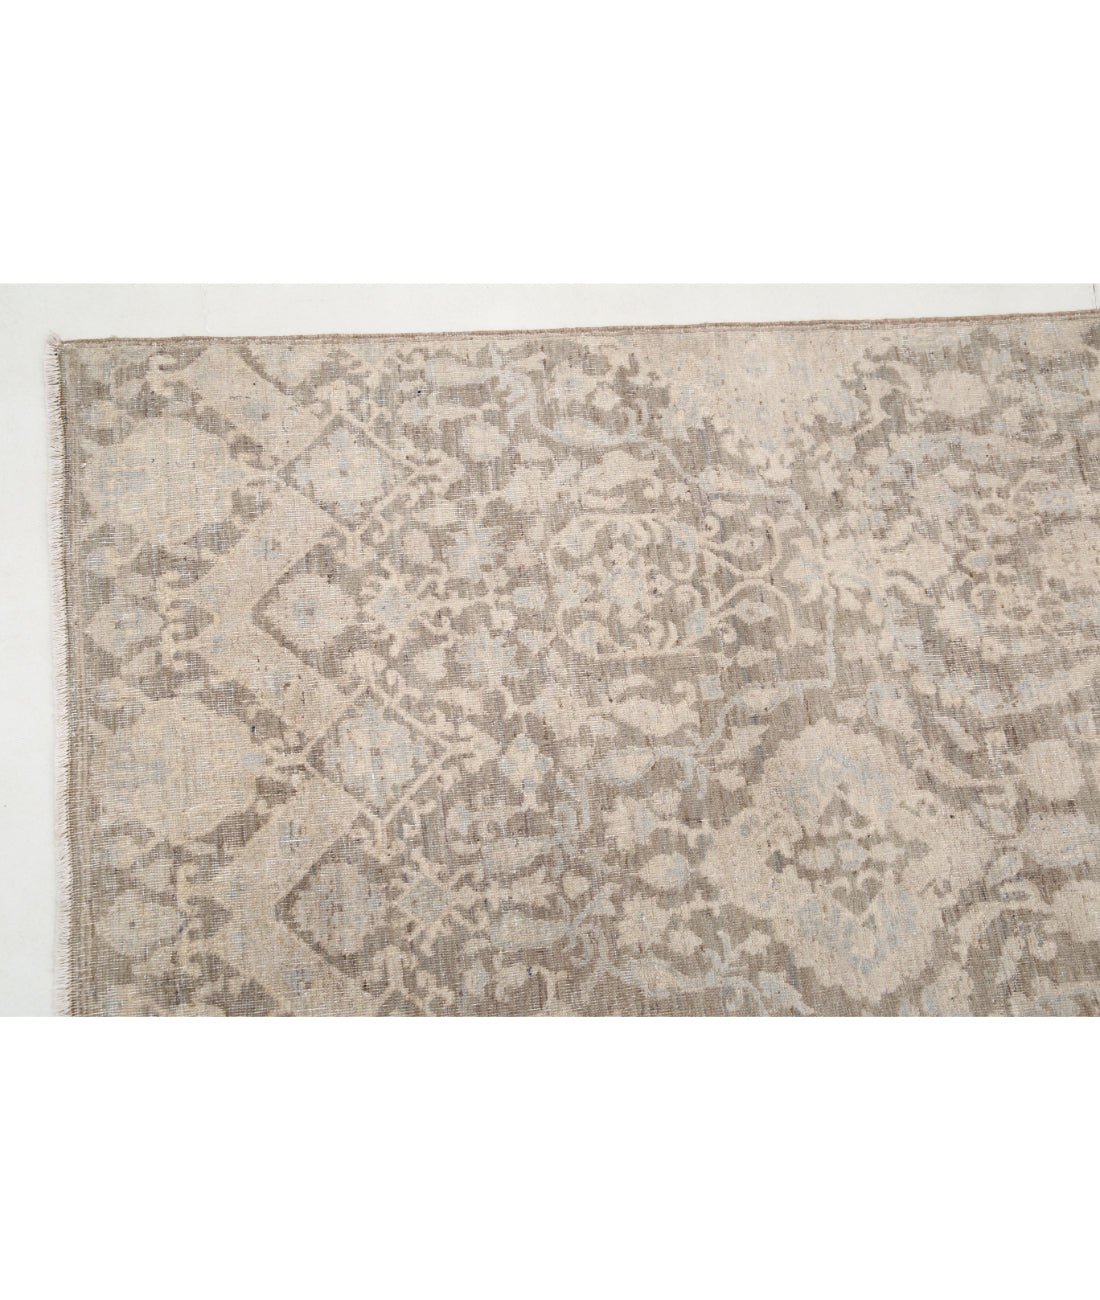 Hand Knotted Artemix Wool Rug - 7'8'' x 9'4'' 7'8'' x 9'4'' (230 X 280) / Grey / Ivory